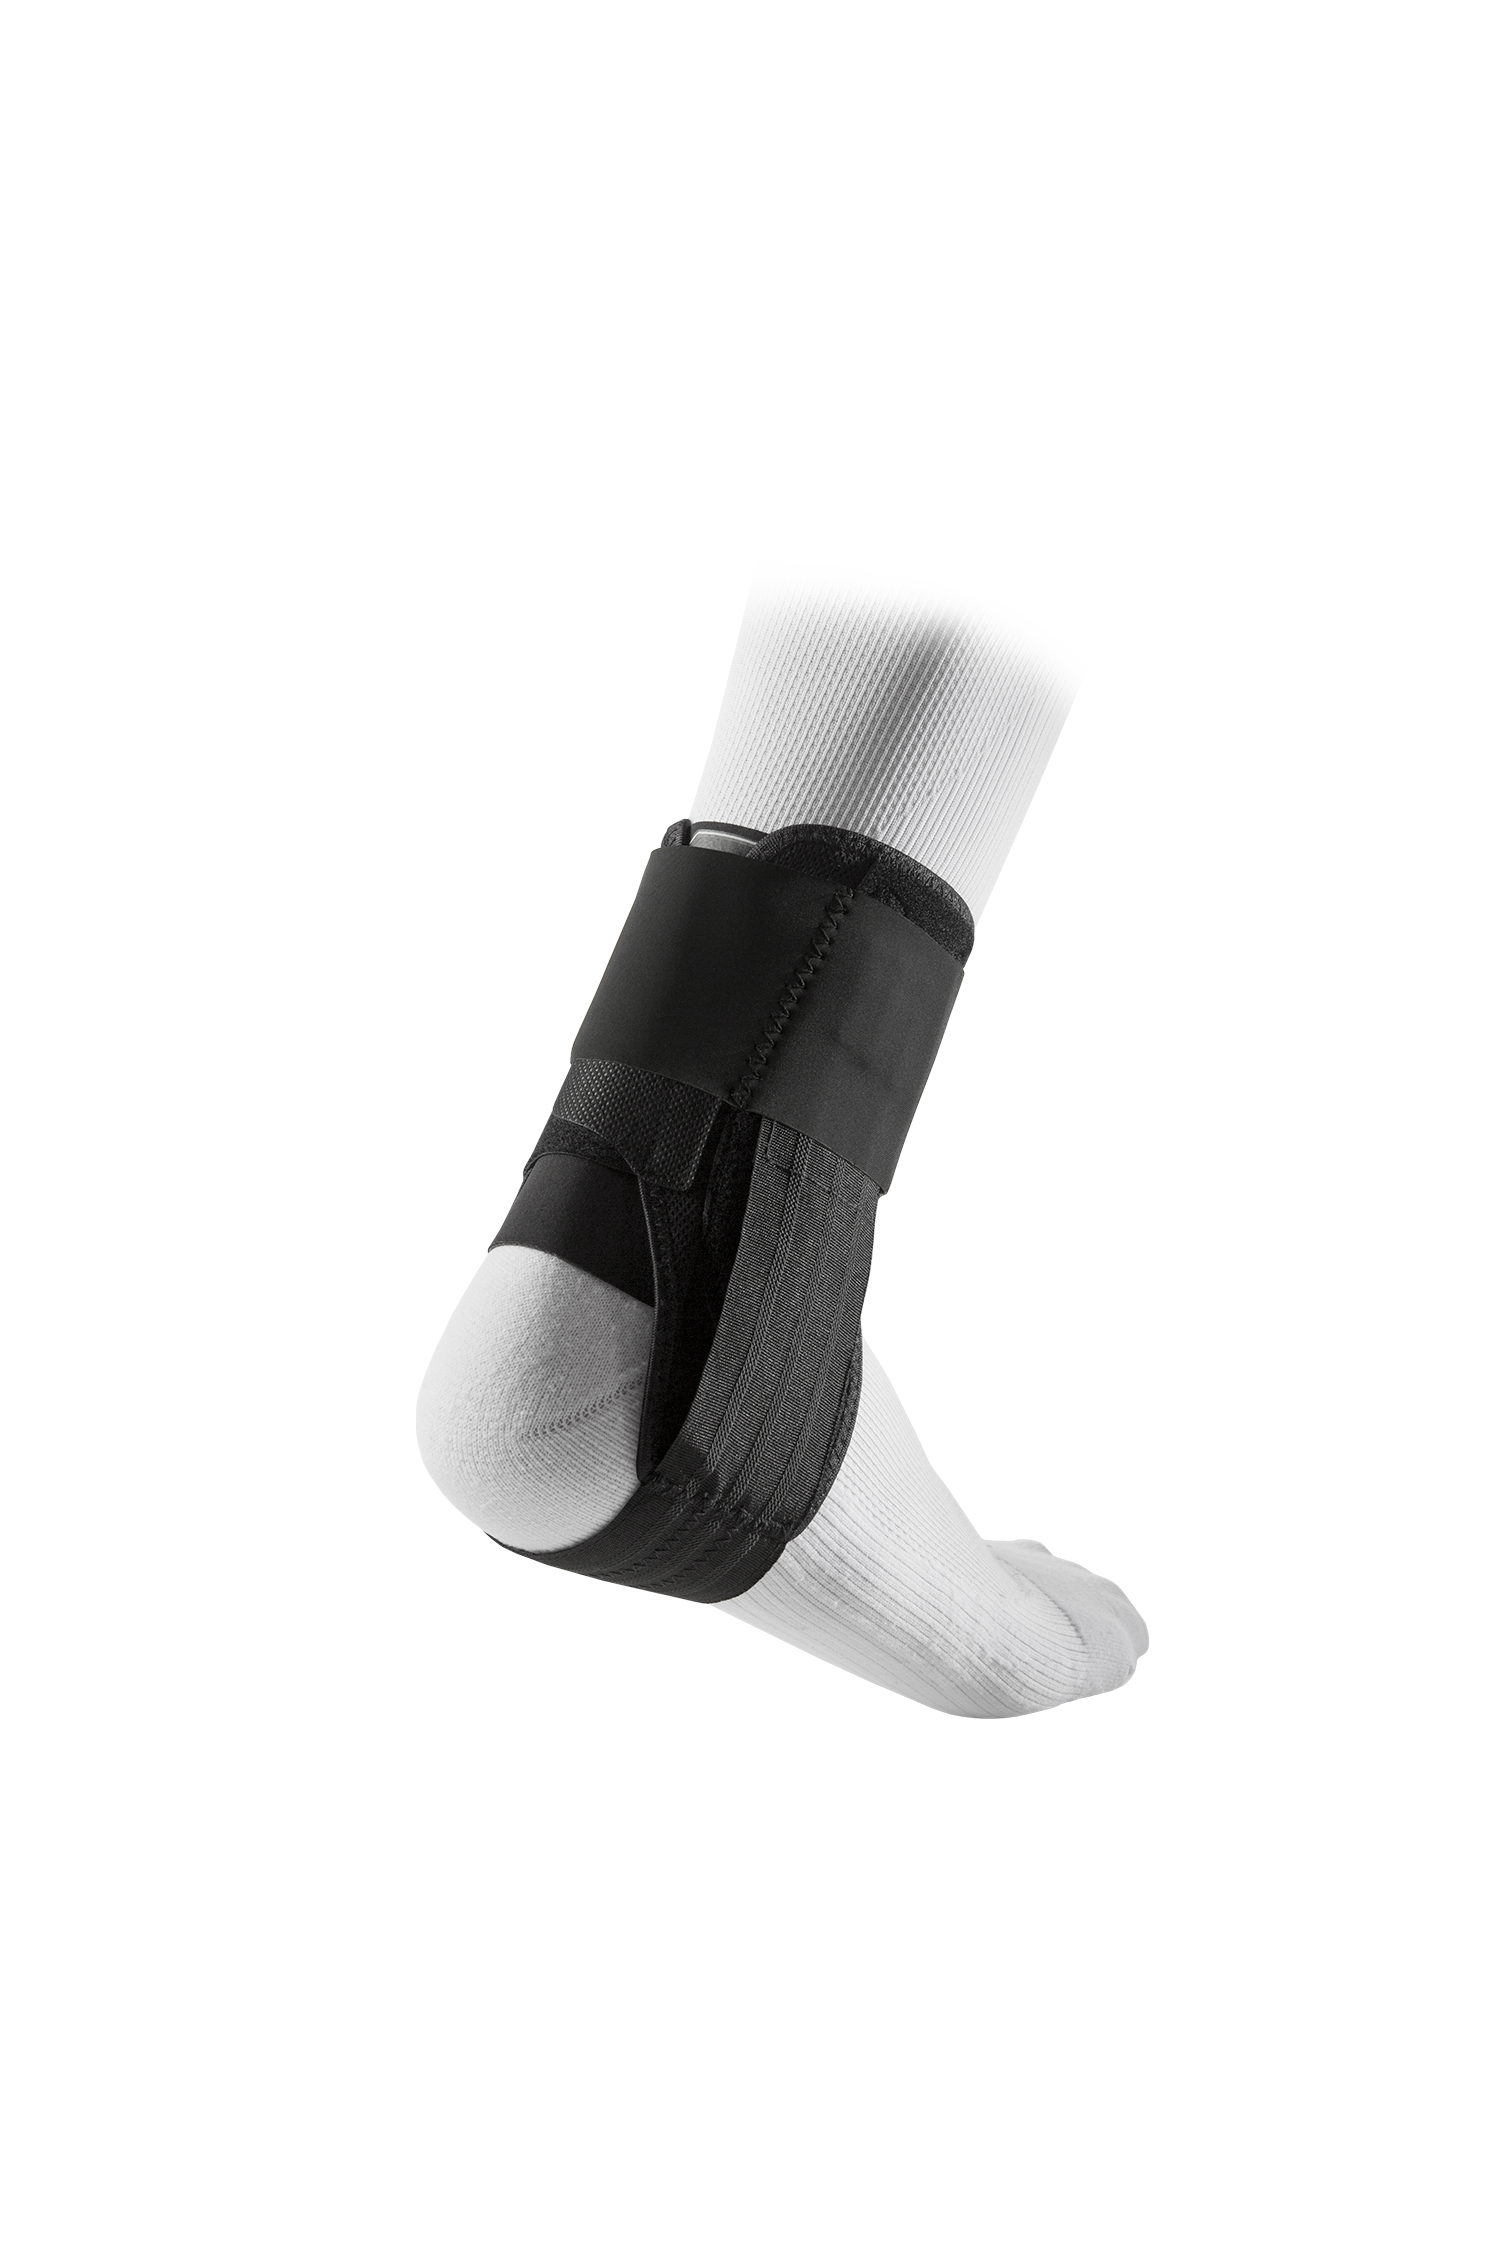 McDavid Stealth Ankle Brace with Minimal Coverage & Flex-Support Stays,  Assorted Sizes